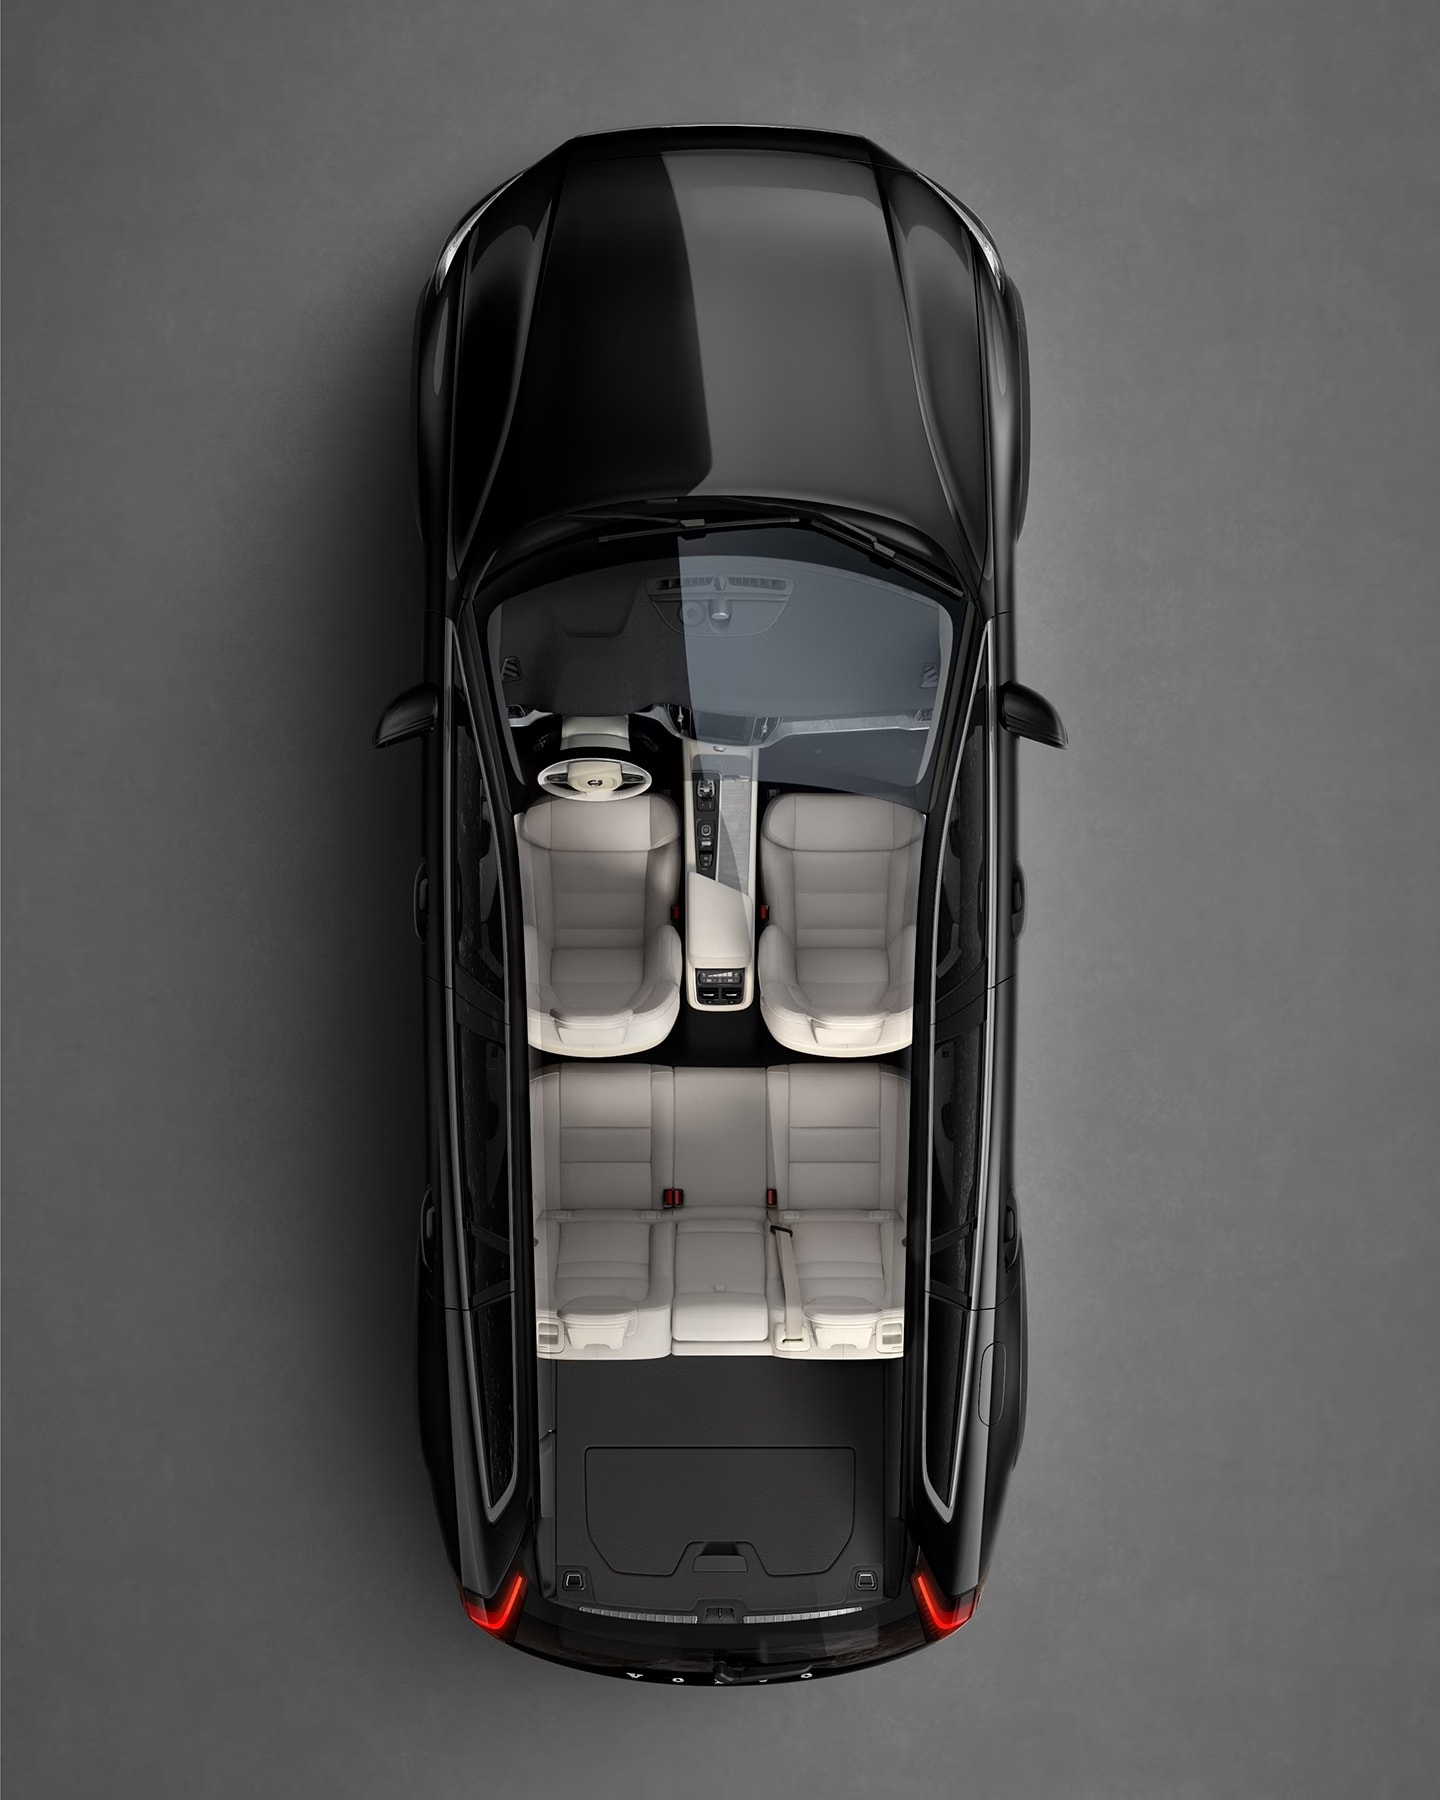 A black Volvo V60 cross country seen from directly above with interior visible.